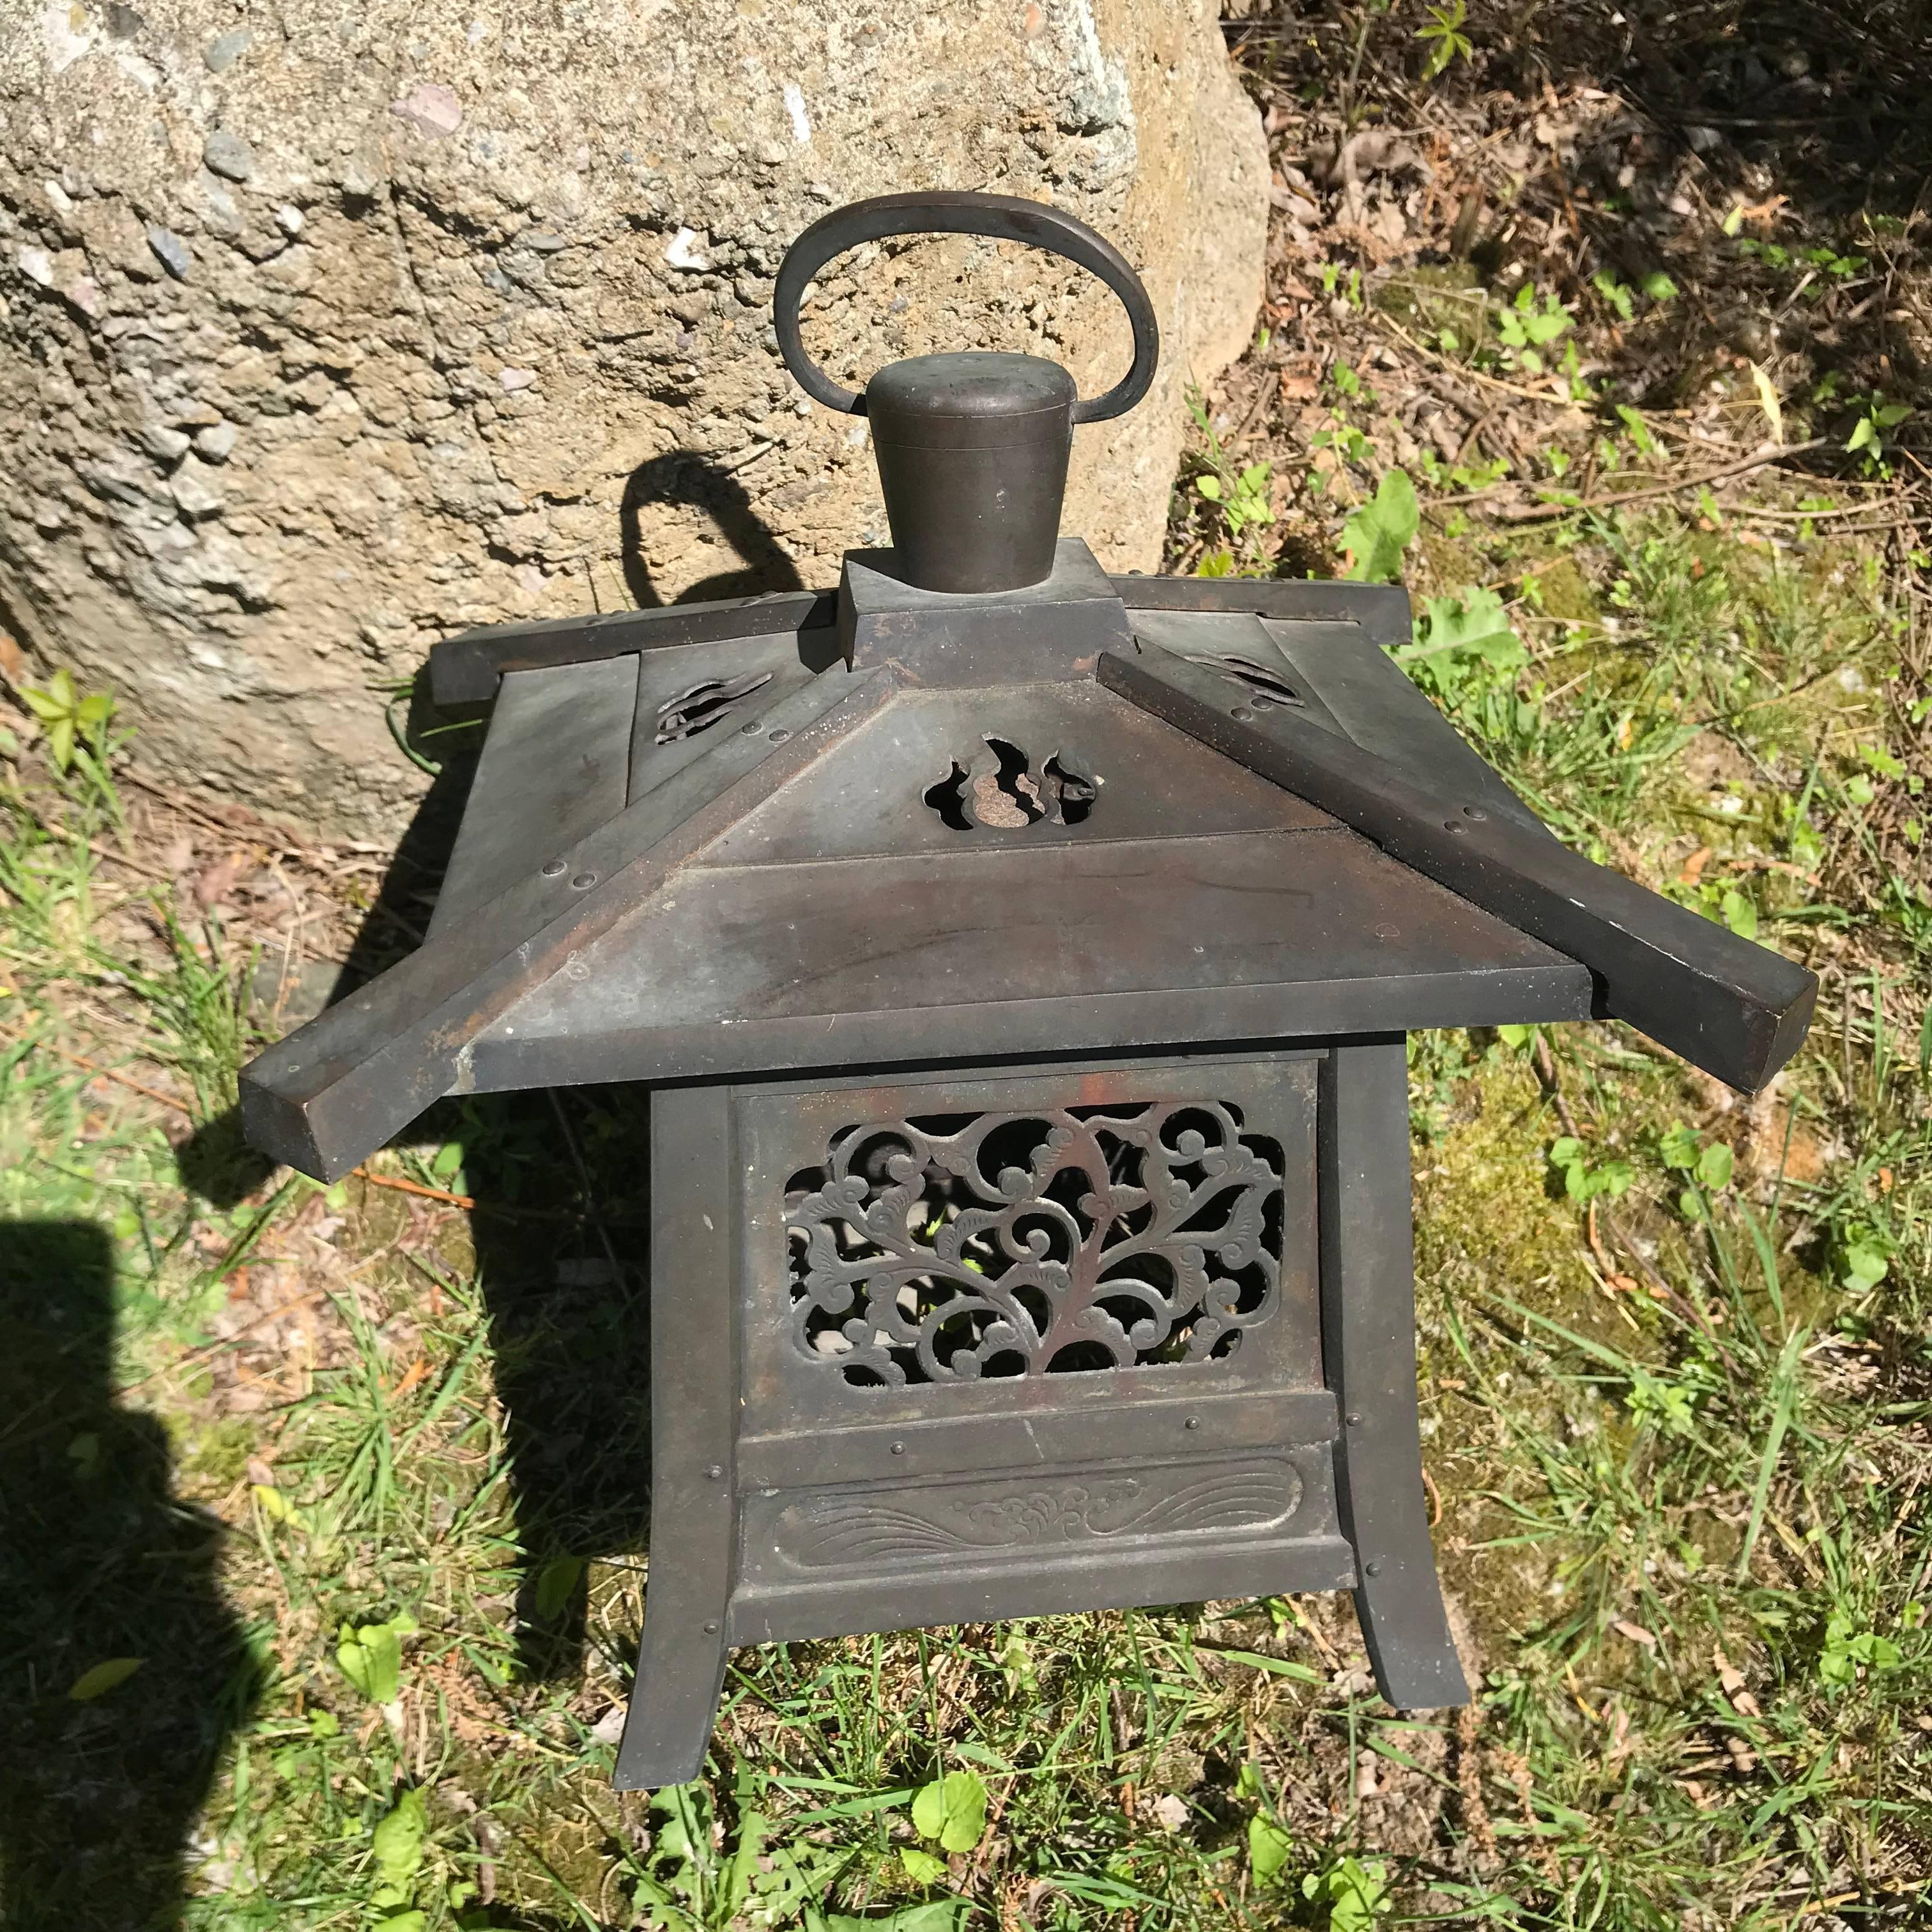 Japan, a fine large antique heavy and hand cast bronze lantern with exquisite details from the early Taisho period.

May be suspended from sturdy loop handle or placed on any surface as it includes heavy cast feet.

The striking and well